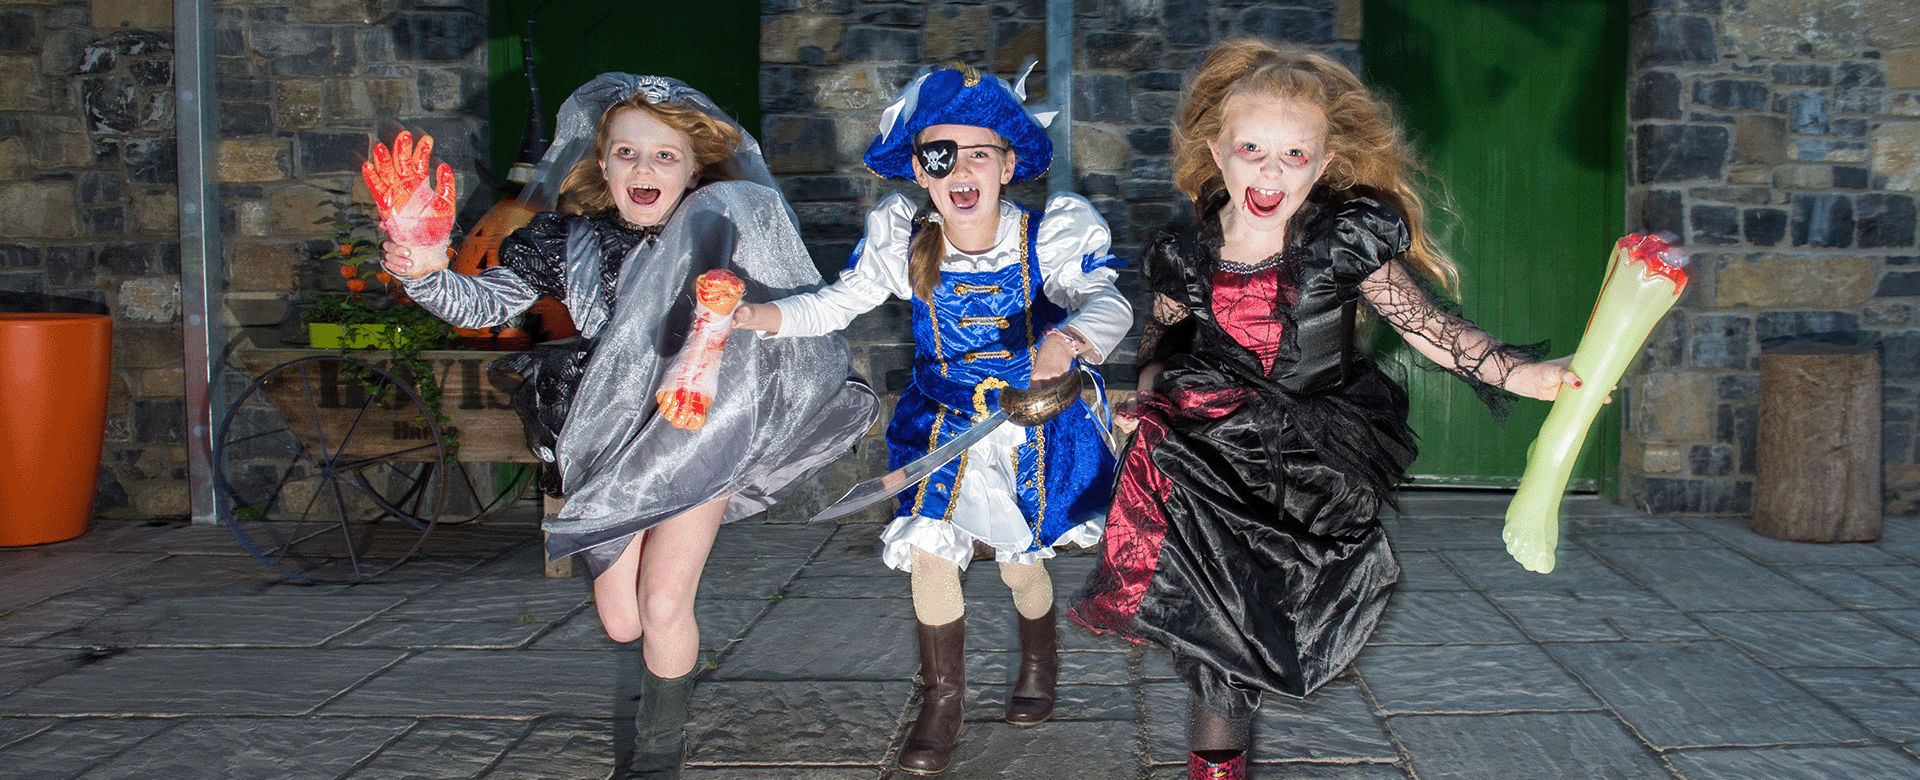 children dressed in halloween costumes holding severed limbs and screaming 